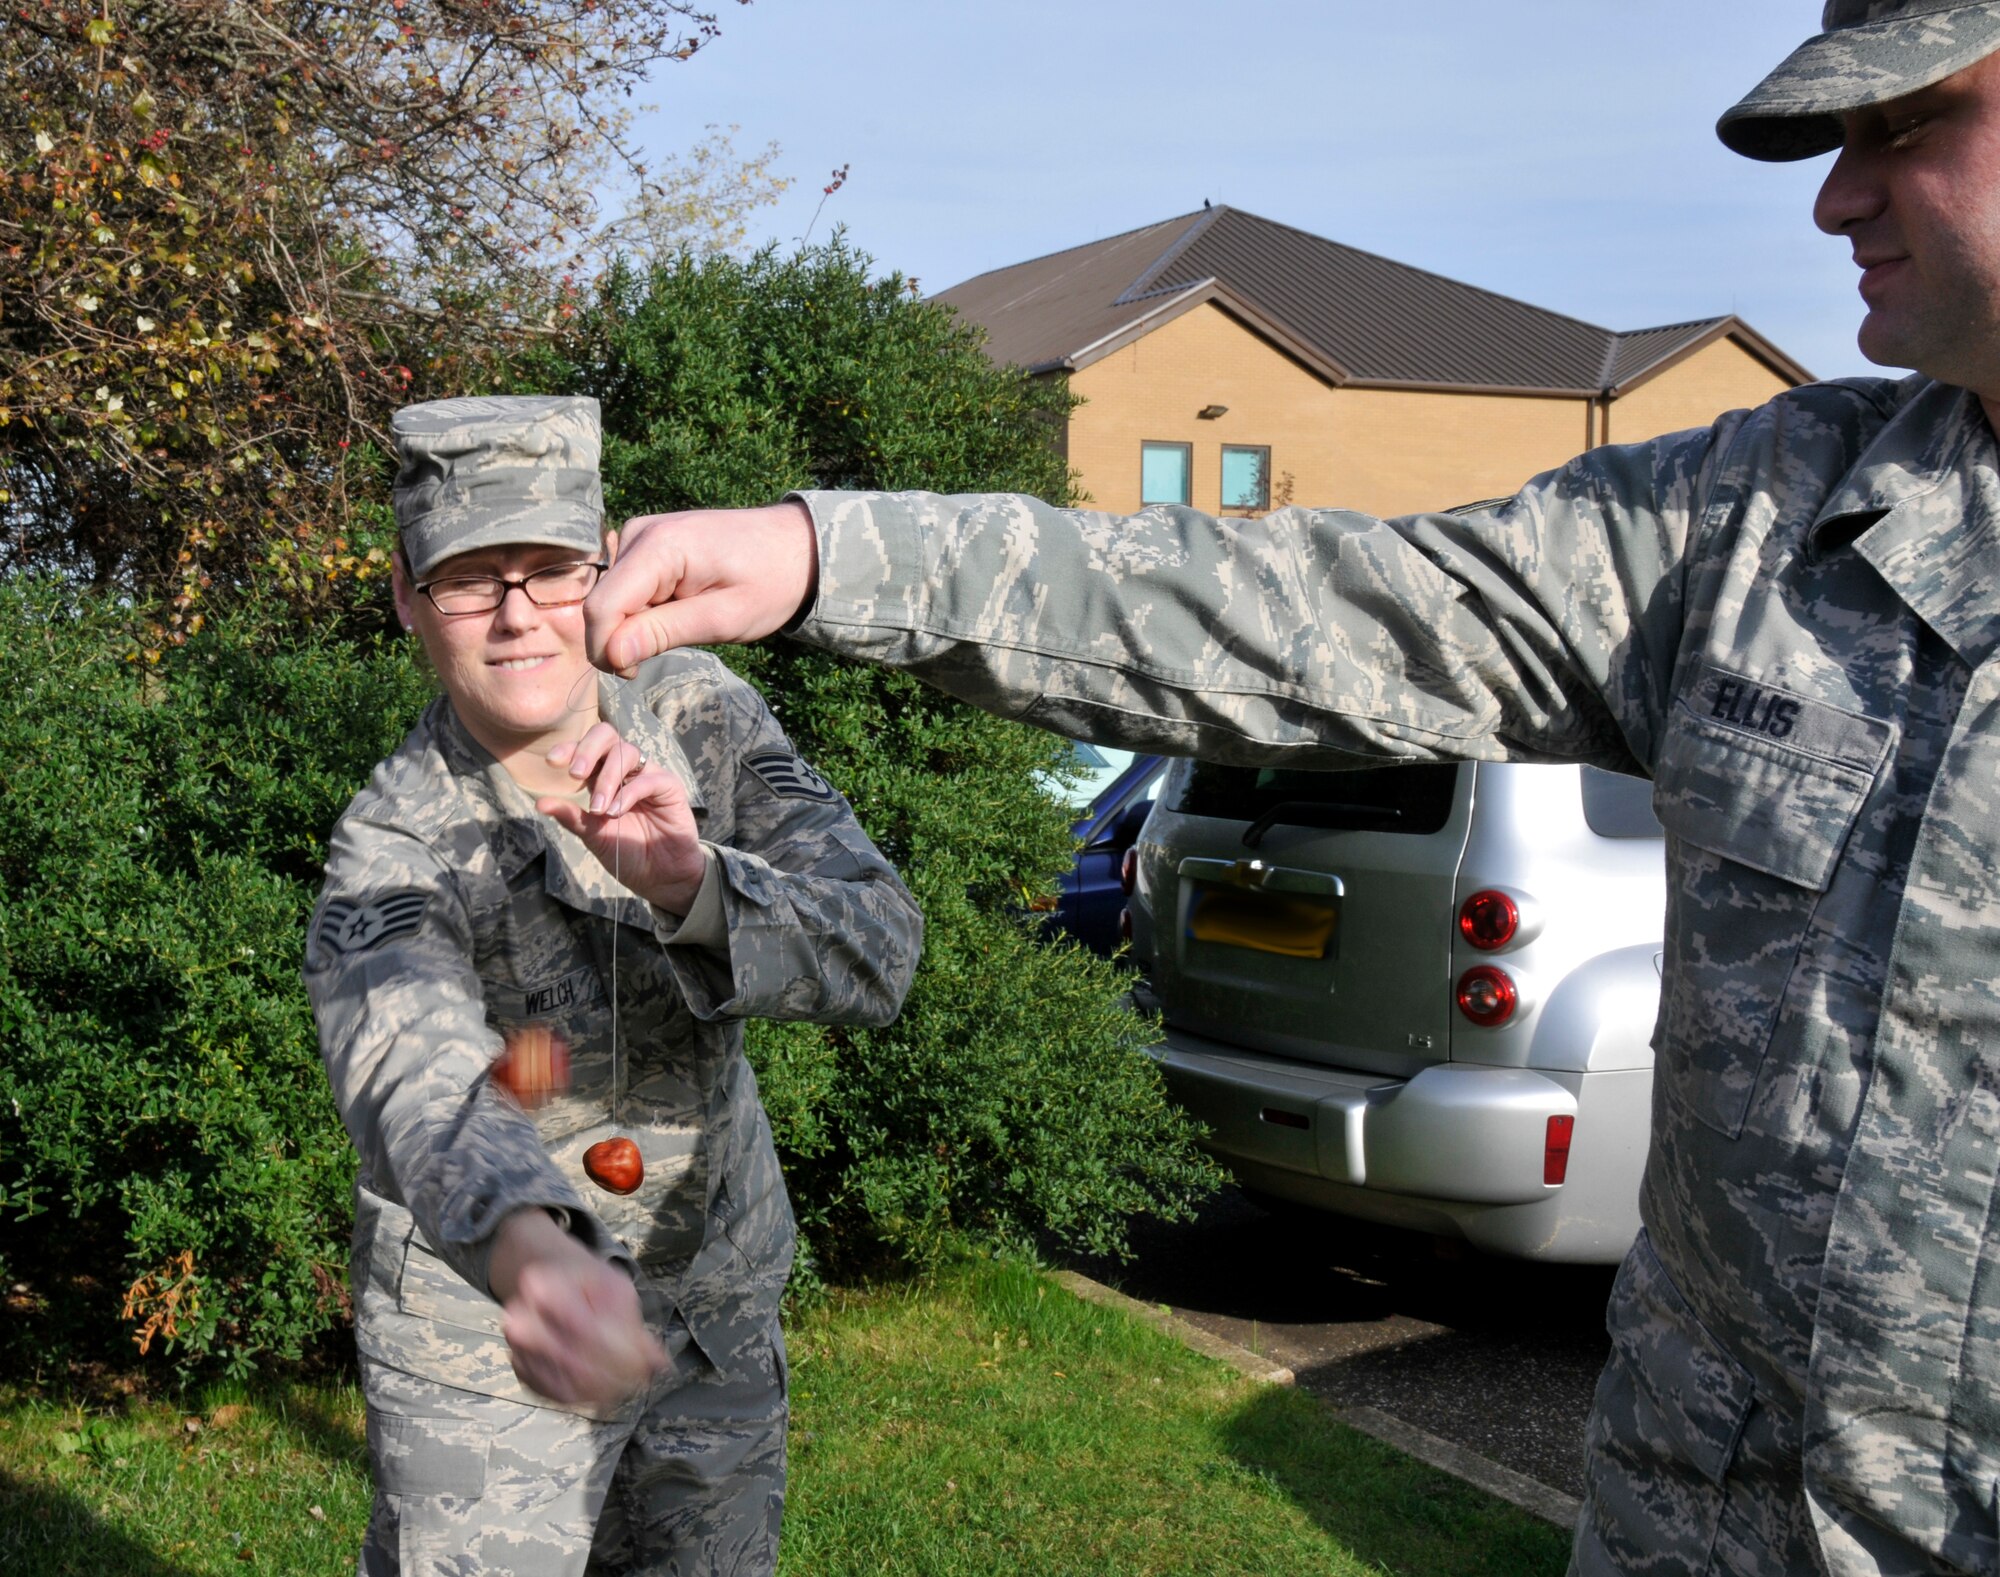 Staff Sgt Felicia Welch and Senior Airman Brian Ellis engage in a game of conkers. The game is played between two players taking turns striking their opponent’s conker with their own. The intent is to hit the opponent’s conker as hard as possible, inflicting damage on your opponent.The first recorded game of conkers dates back to 1848 on the Isle of Wight. 

Conkers are hard brown nuts found in a prickly case that fall from the tree when ripe. The origin of the name 'conker' is unclear but it's believed that it comes from the French word 'cogner' meaning to hit. ( Photo by A1C Perry Aston)